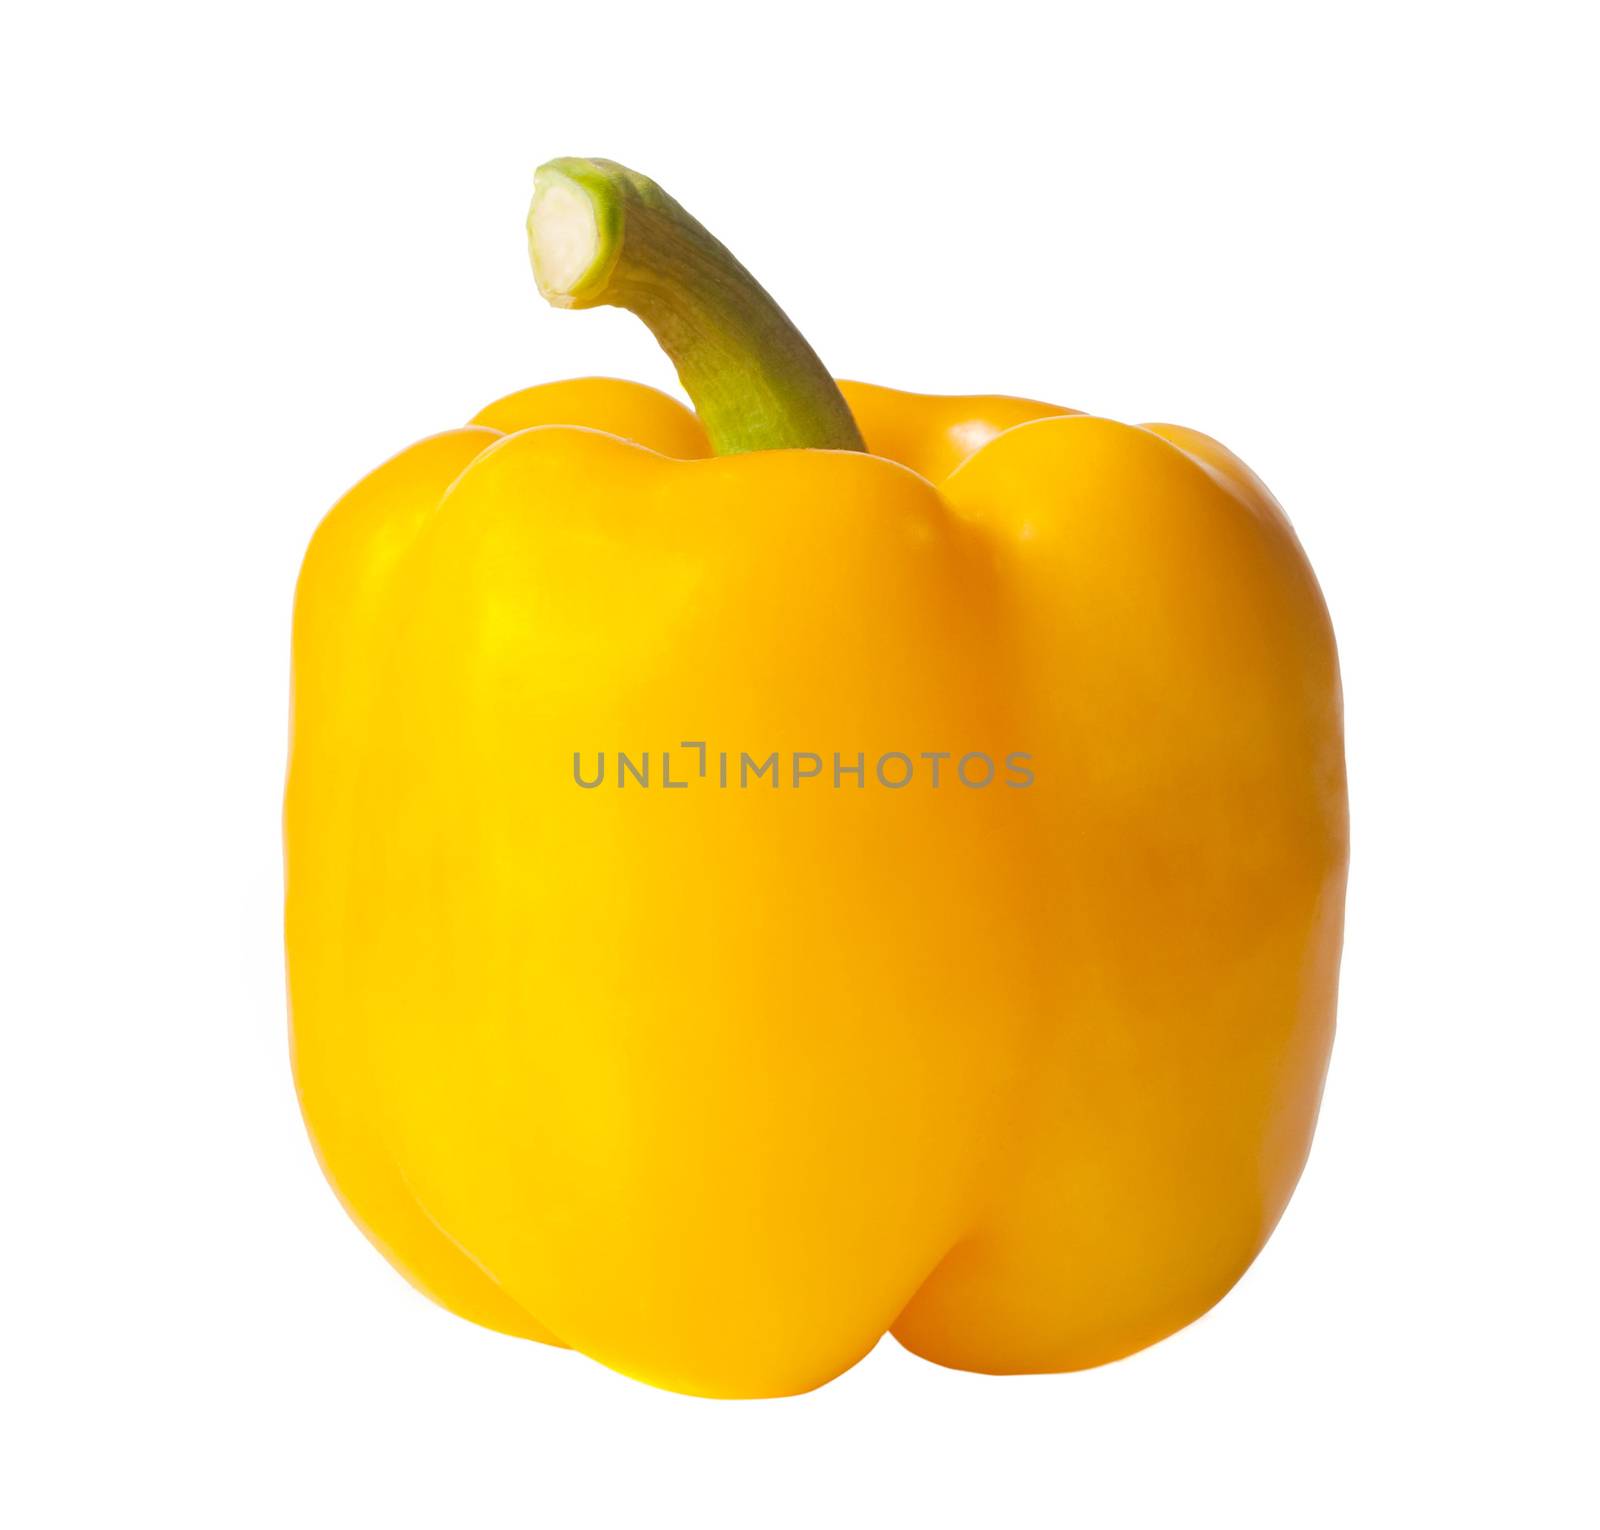 Yellow pepper on white background